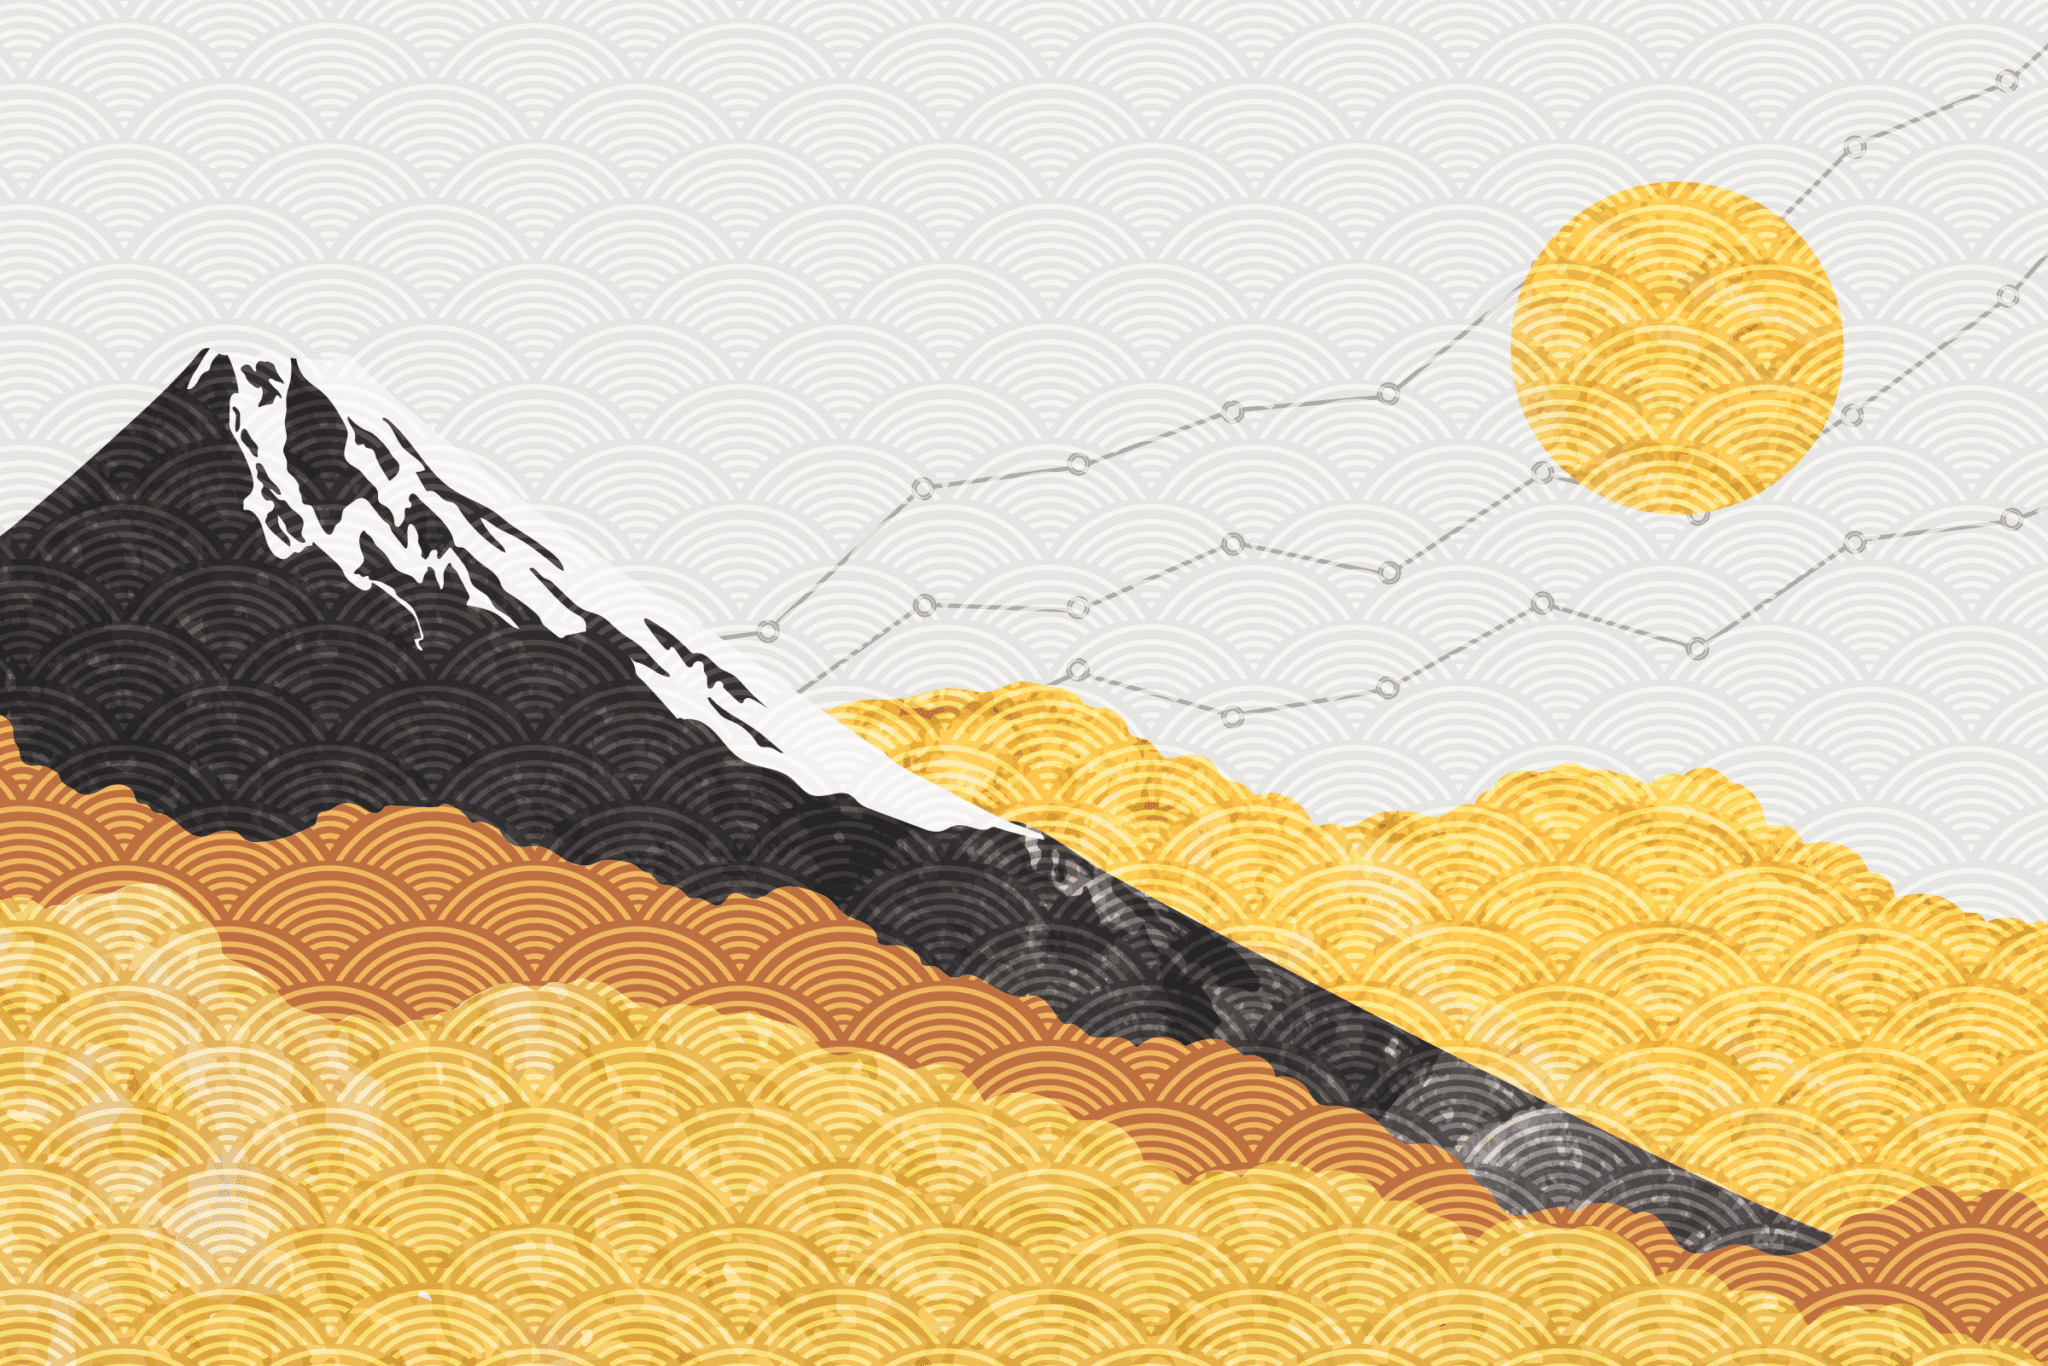 An illustration of a mountain with clouds, aiming to achieve more reach and serve as thought leadership campaign assets.